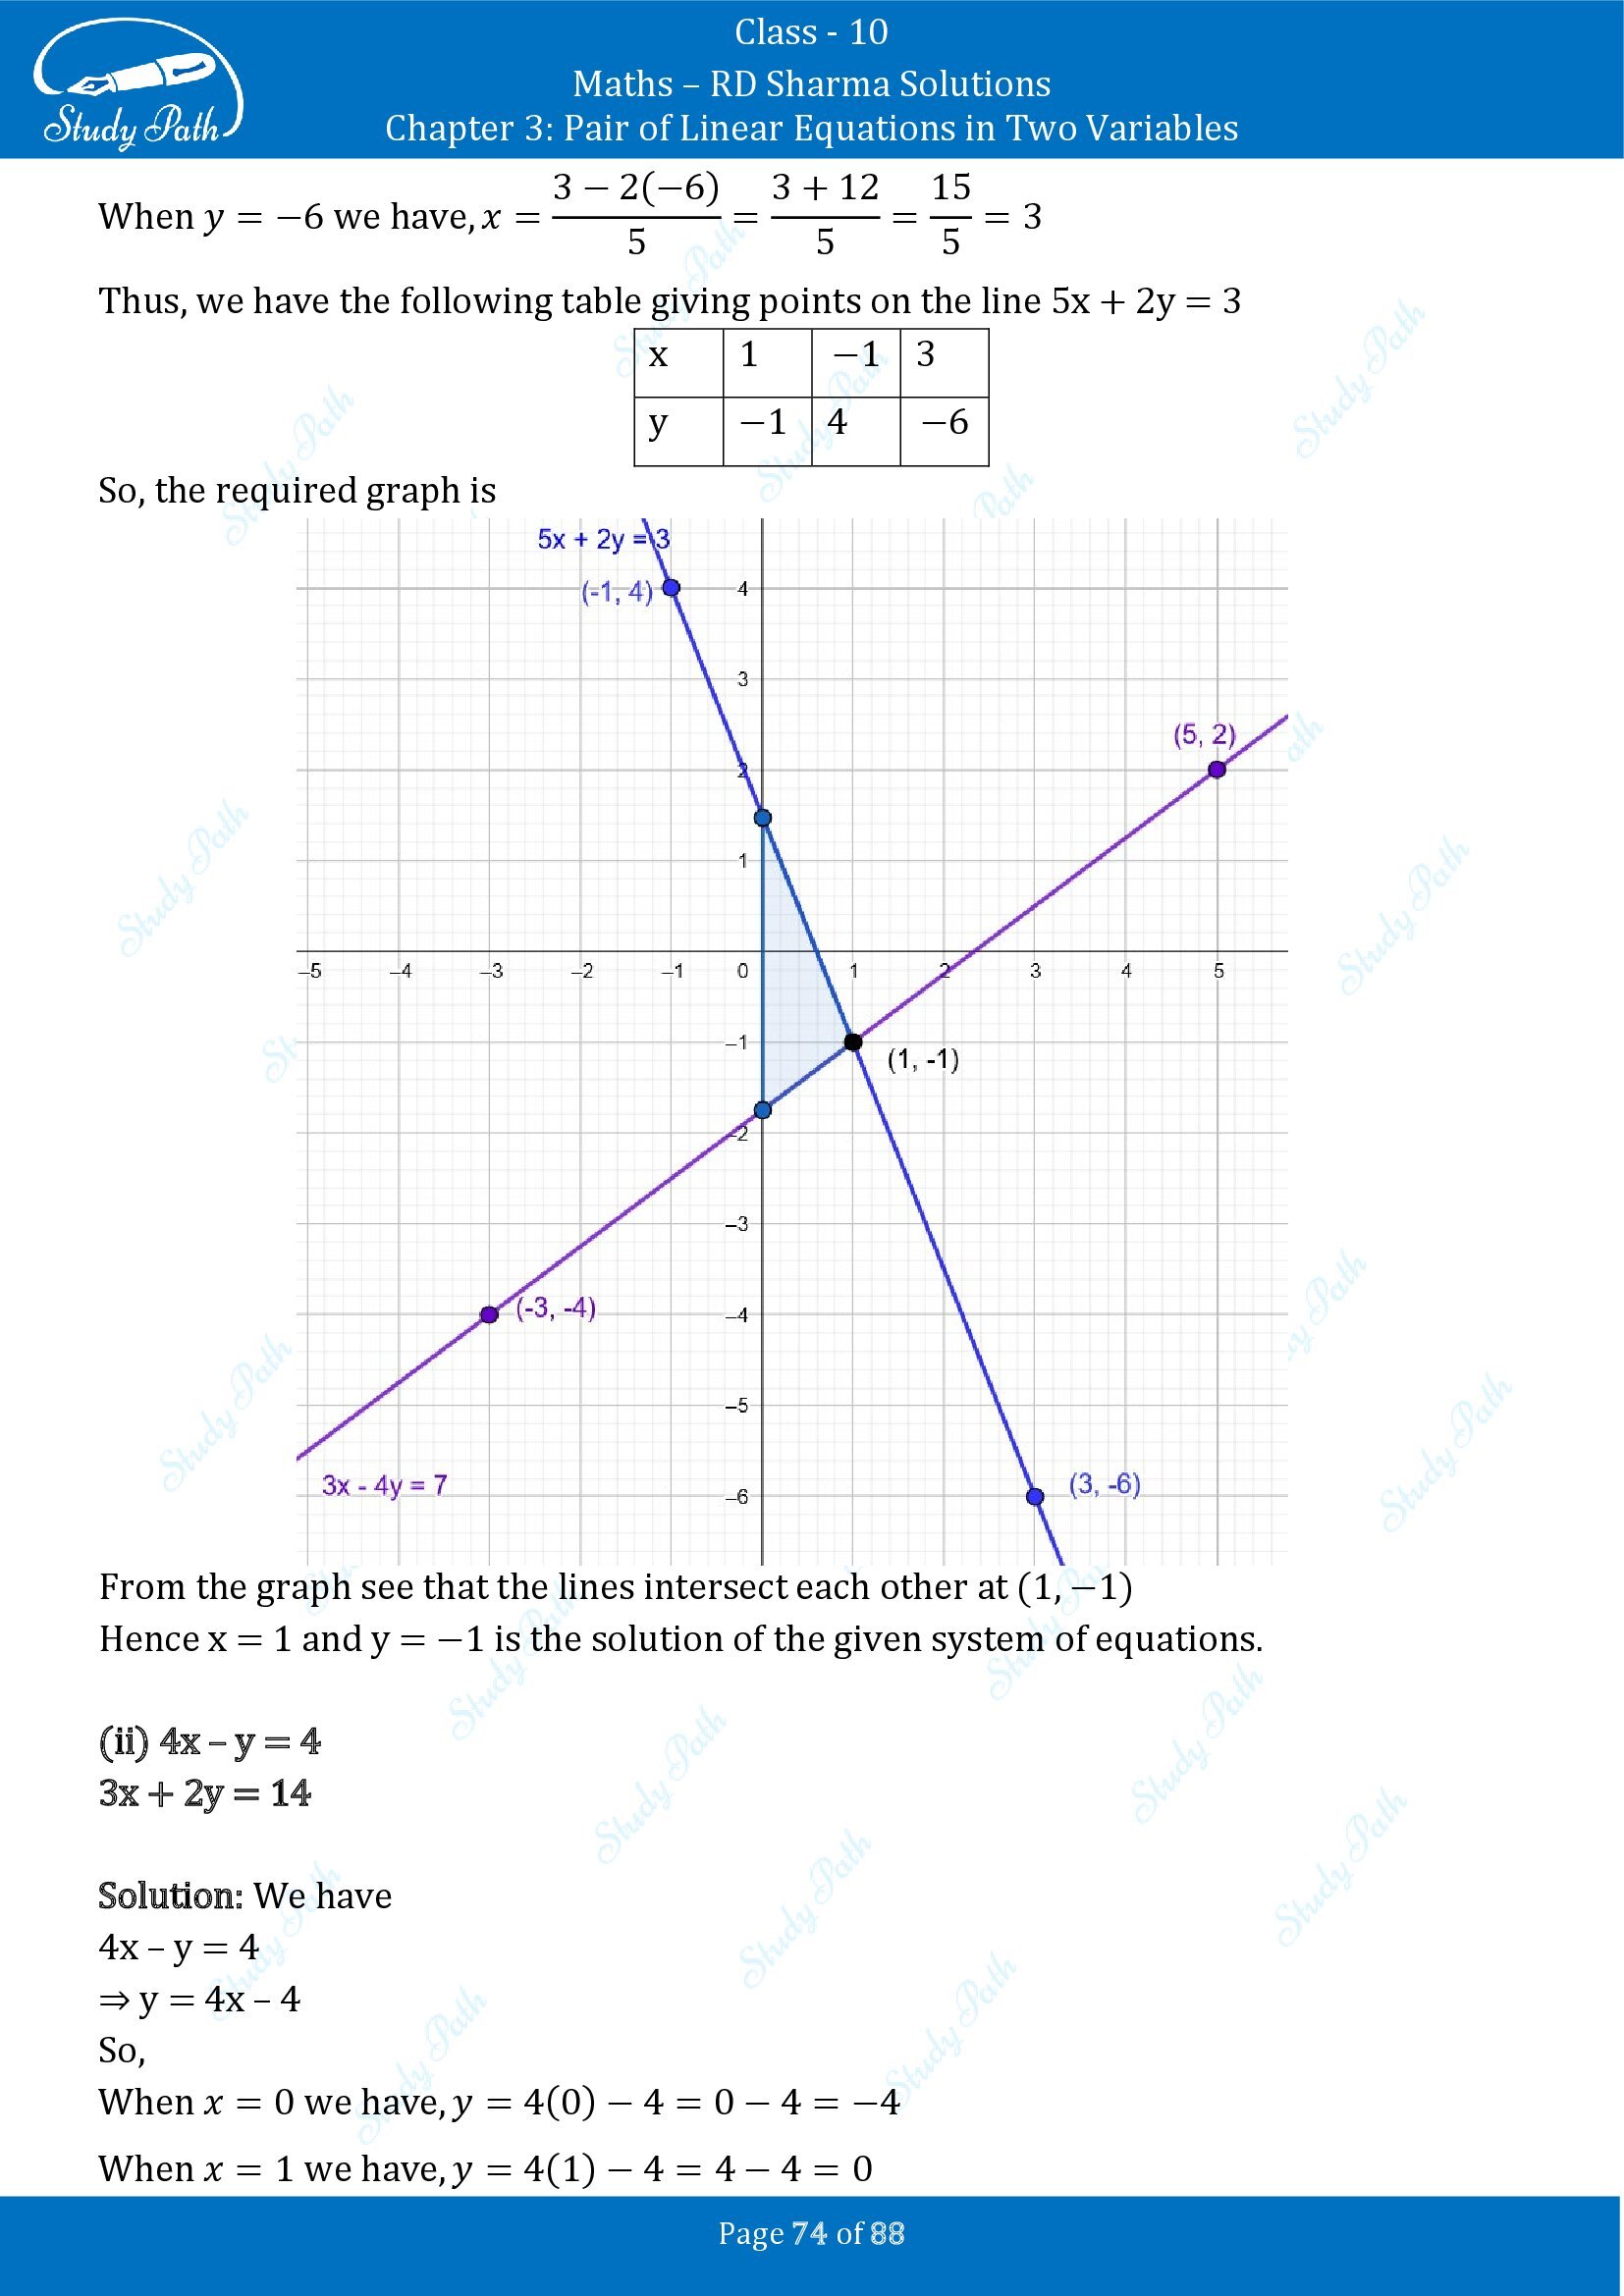 RD Sharma Solutions Class 10 Chapter 3 Pair of Linear Equations in Two Variables Exercise 3.2 00074